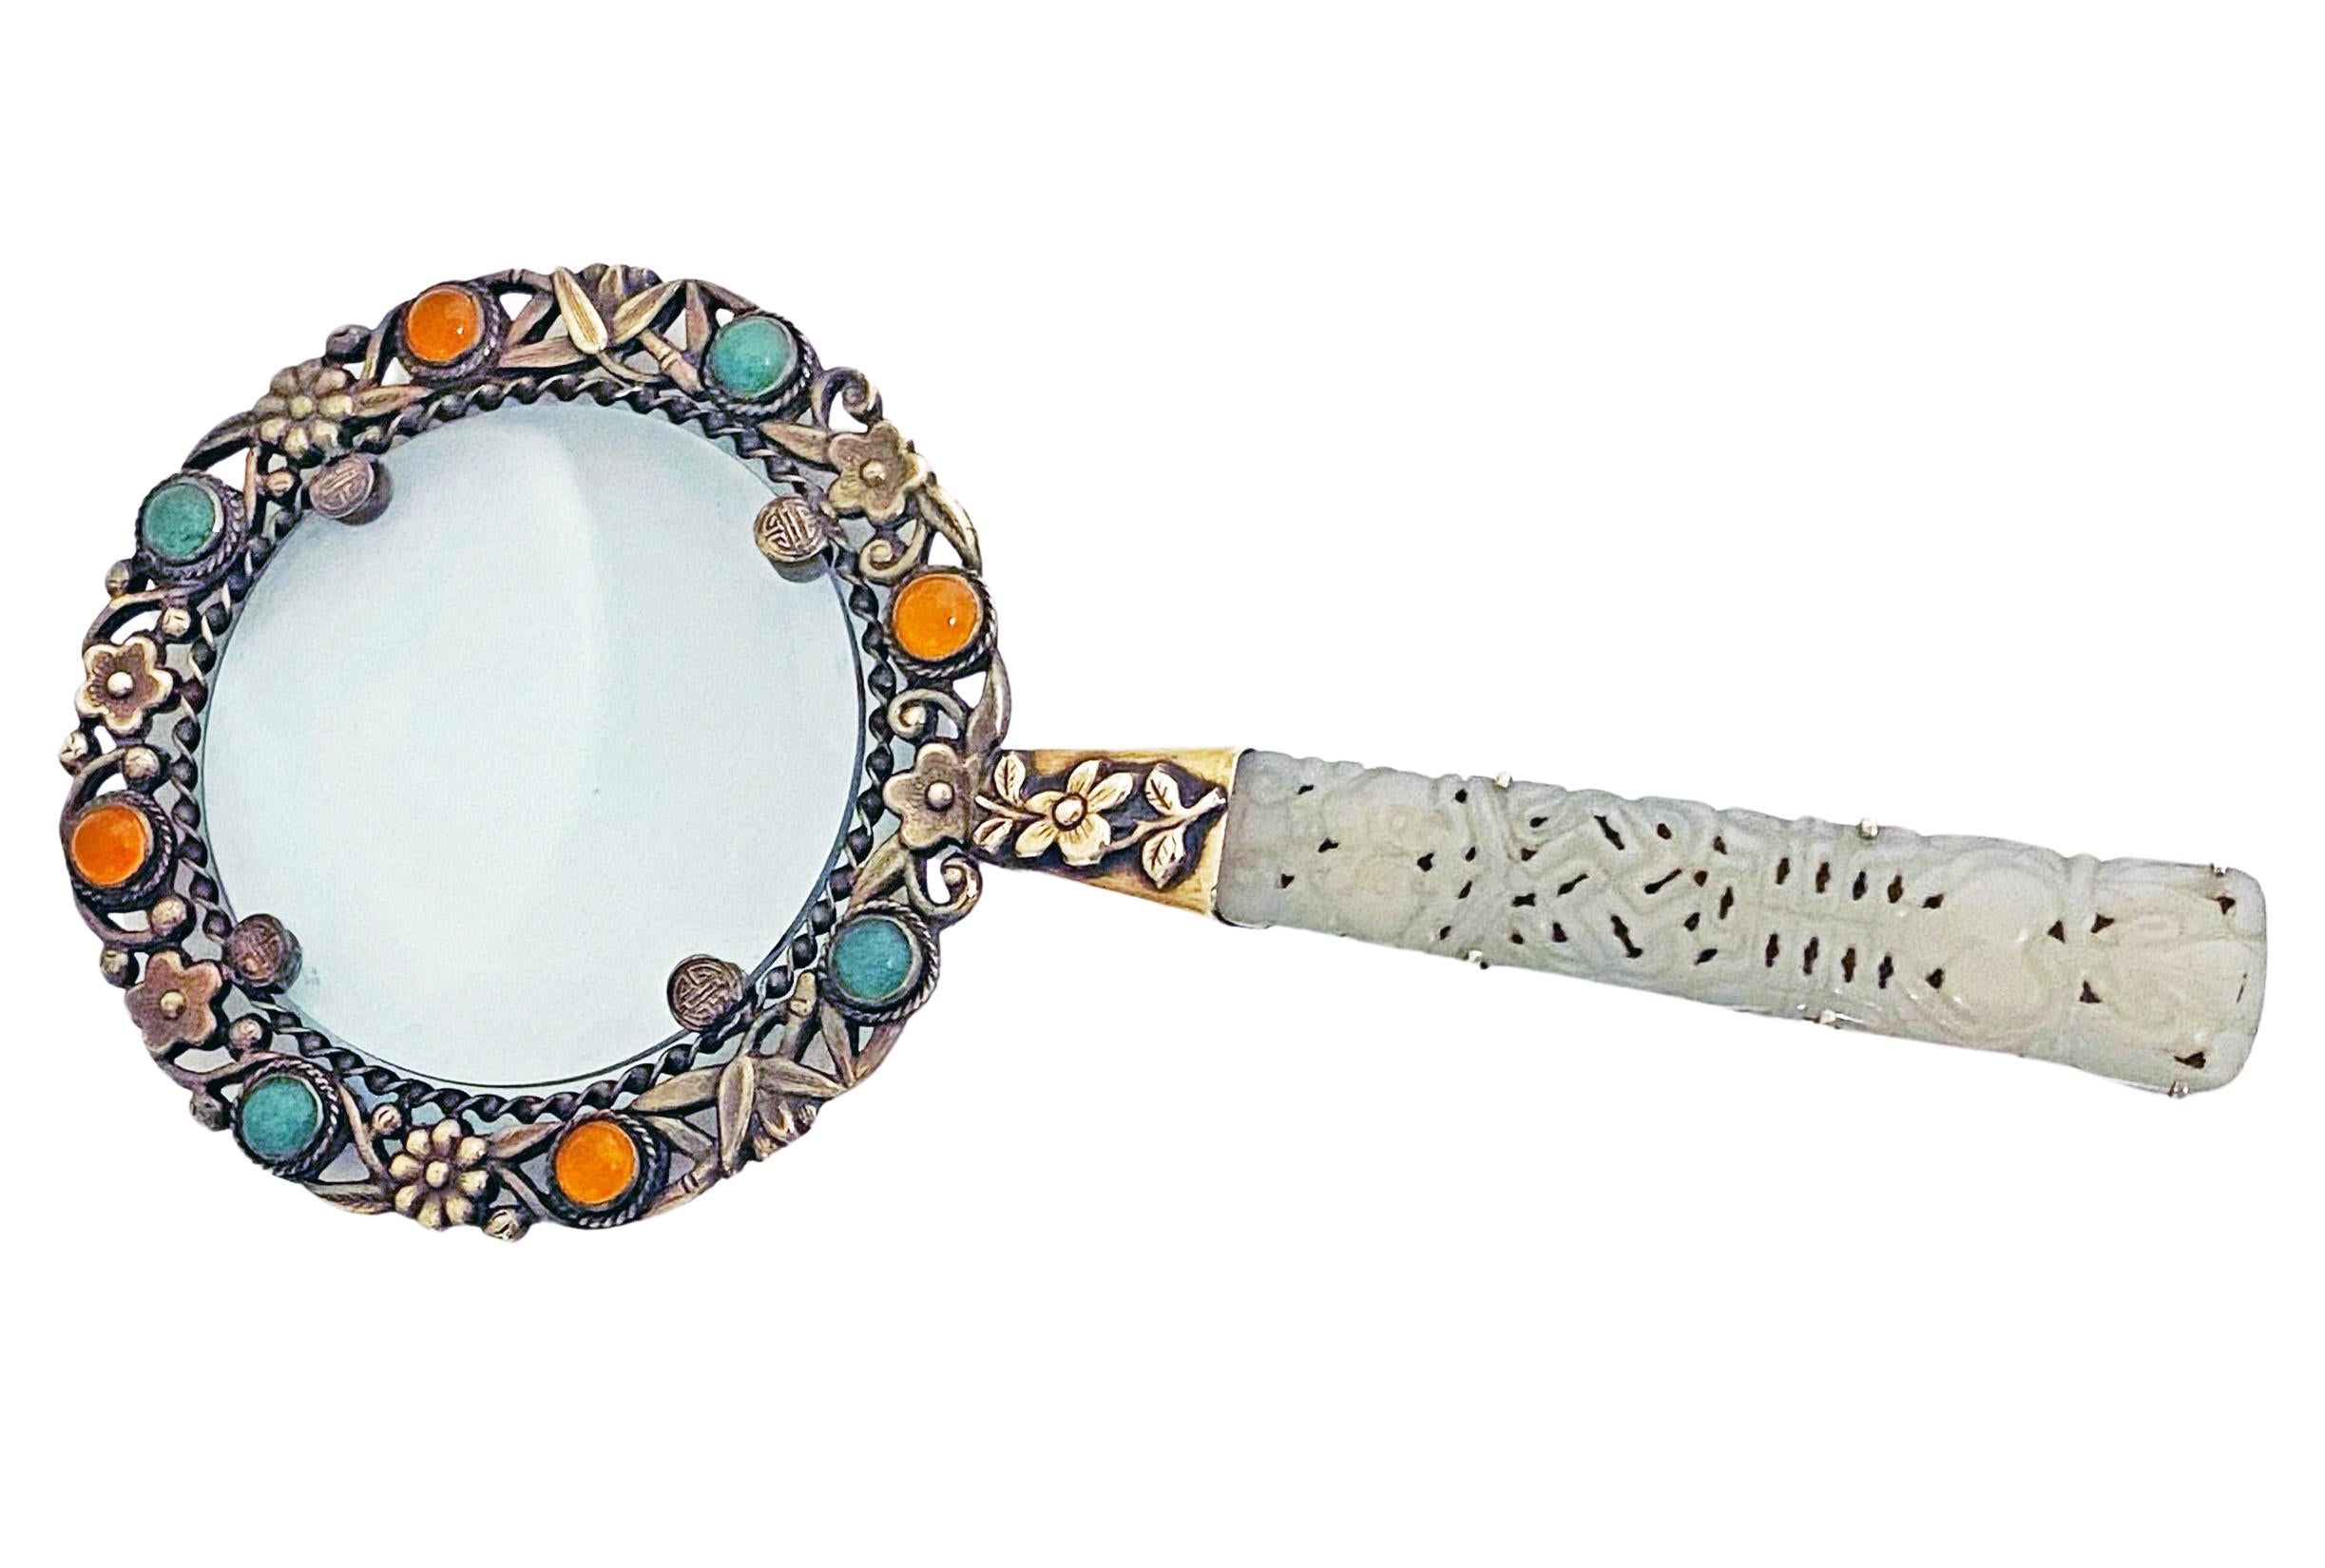 Rare Chinese Export Silver and Jade Magnifying Glass, C.1890. The pierced foliate silver frame bezel set with four green jadeites and four orange carnelian, the handle on one side with engraved silver foliate decoration, traces of original gilding